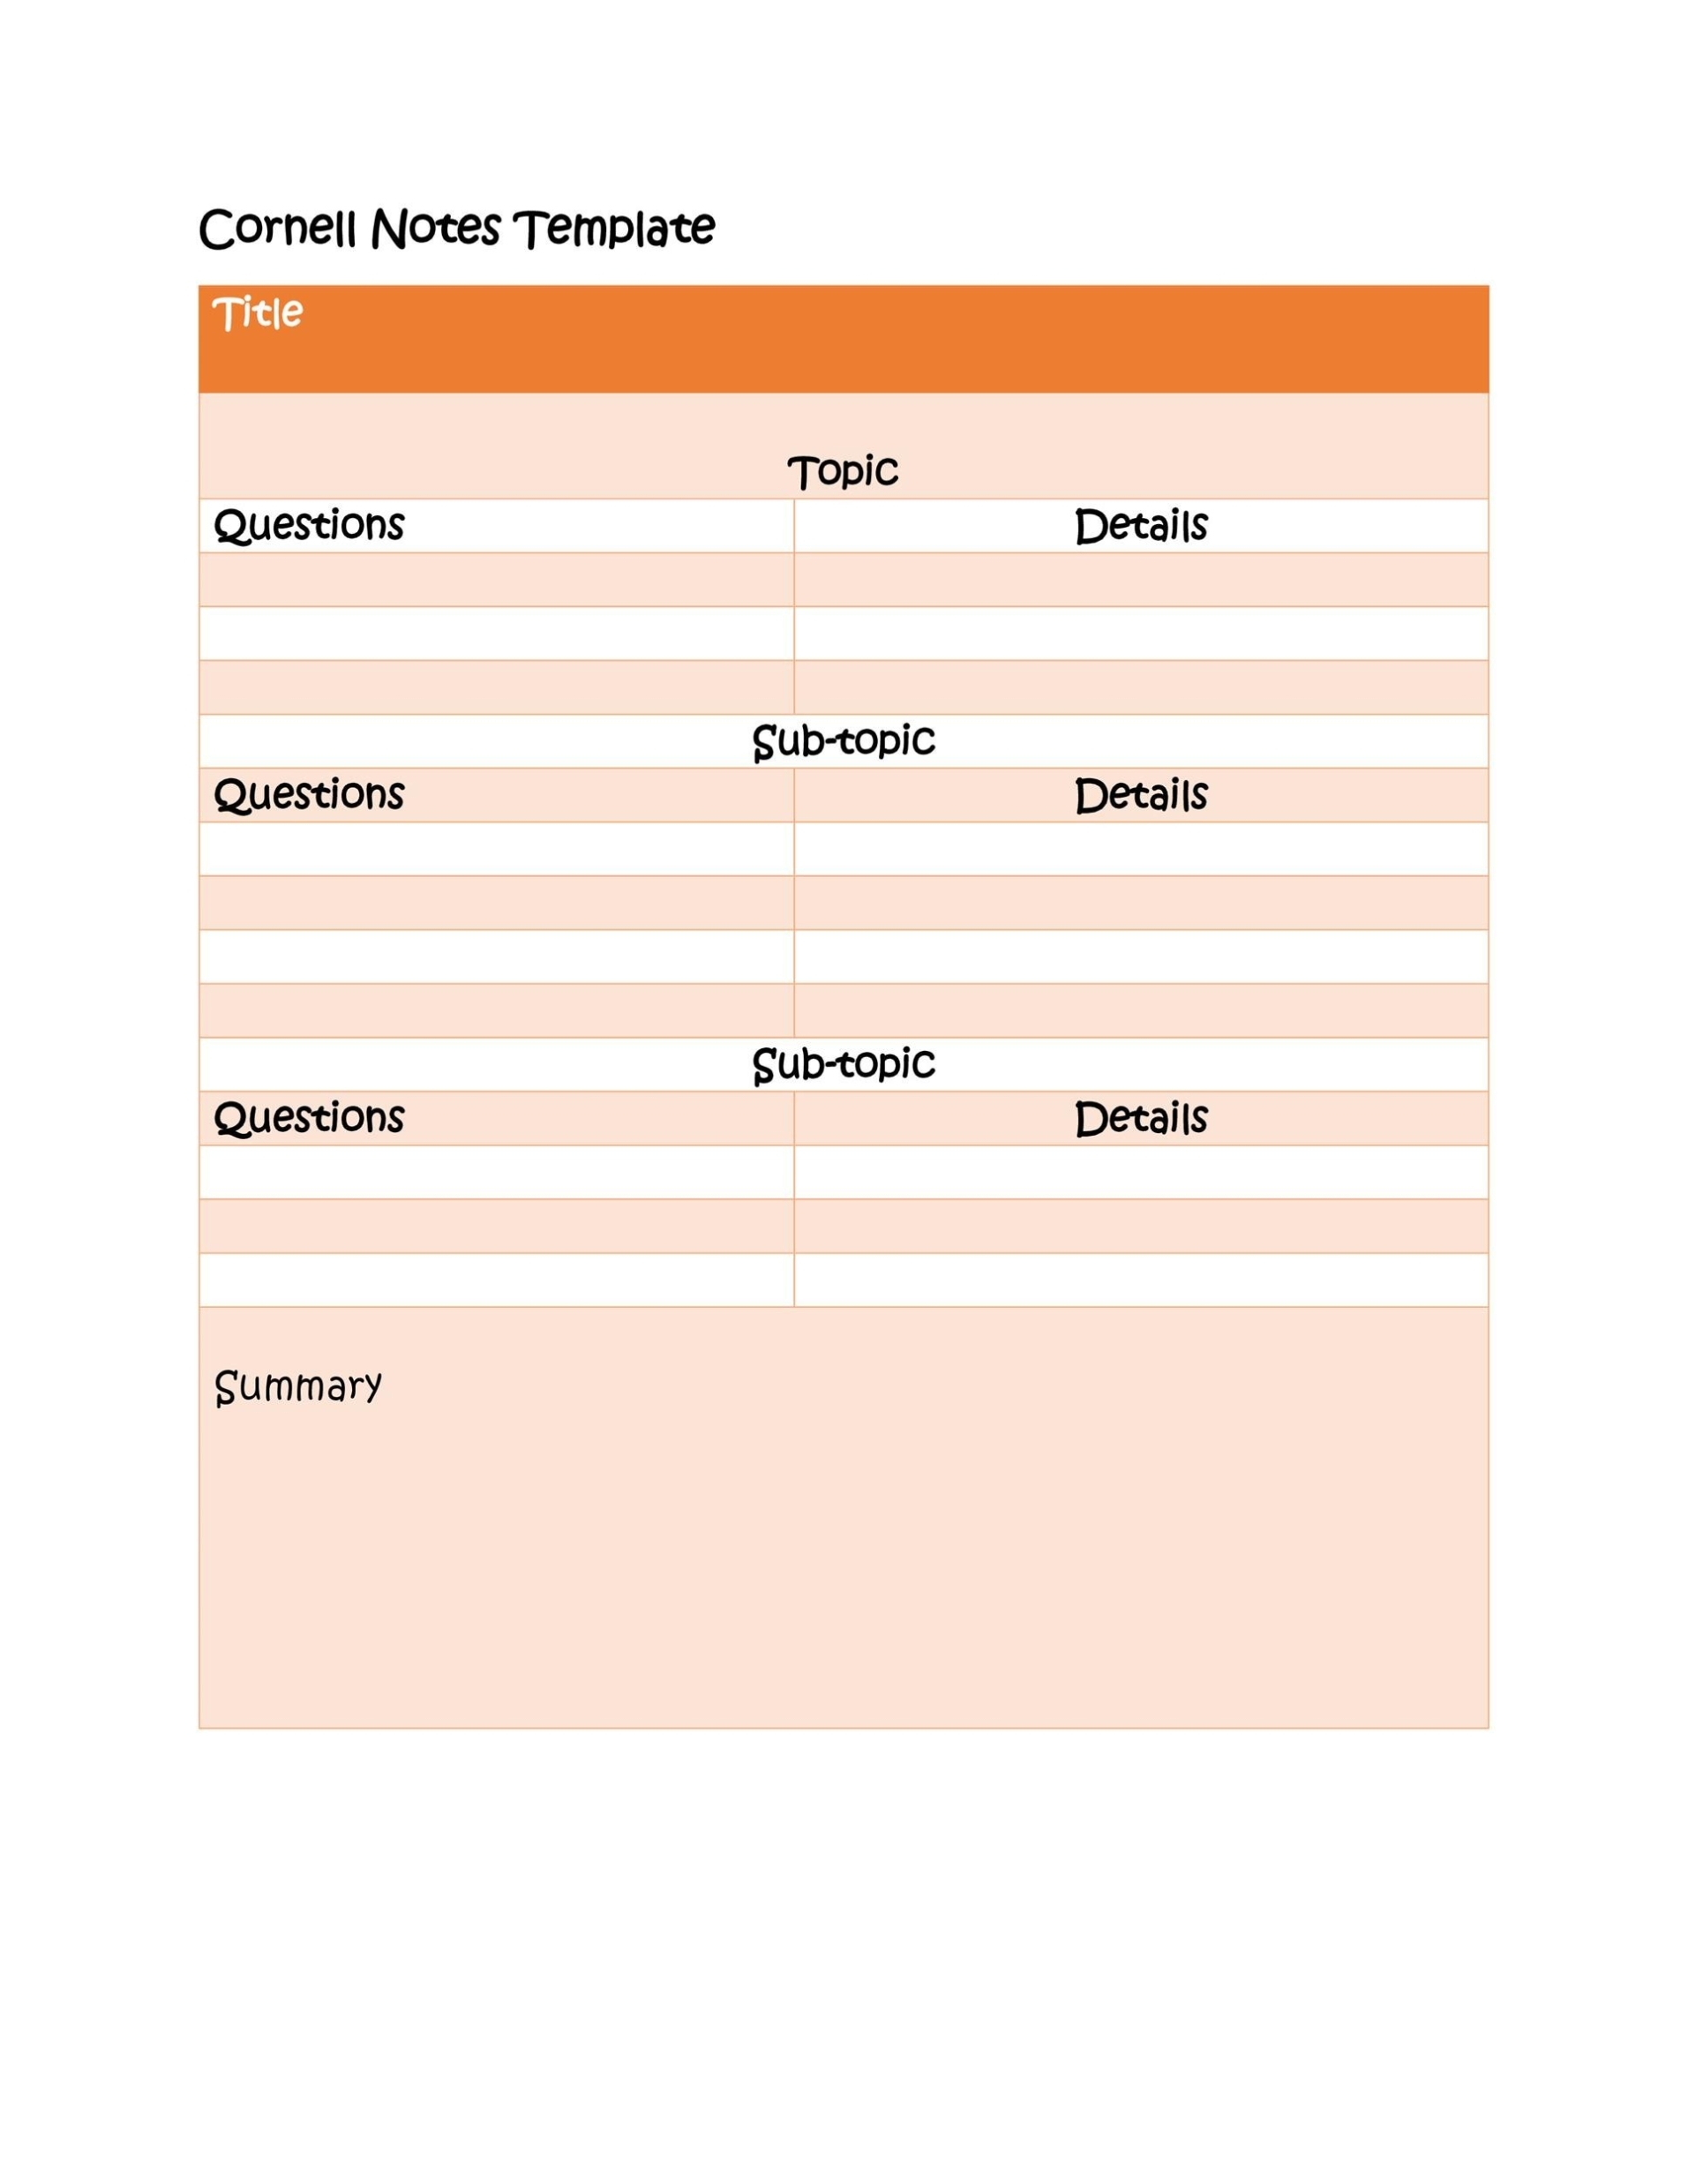 37 Cornell Notes Templates & Examples [Word, Excel, Pdf] ᐅ Regarding Lecture Note Template